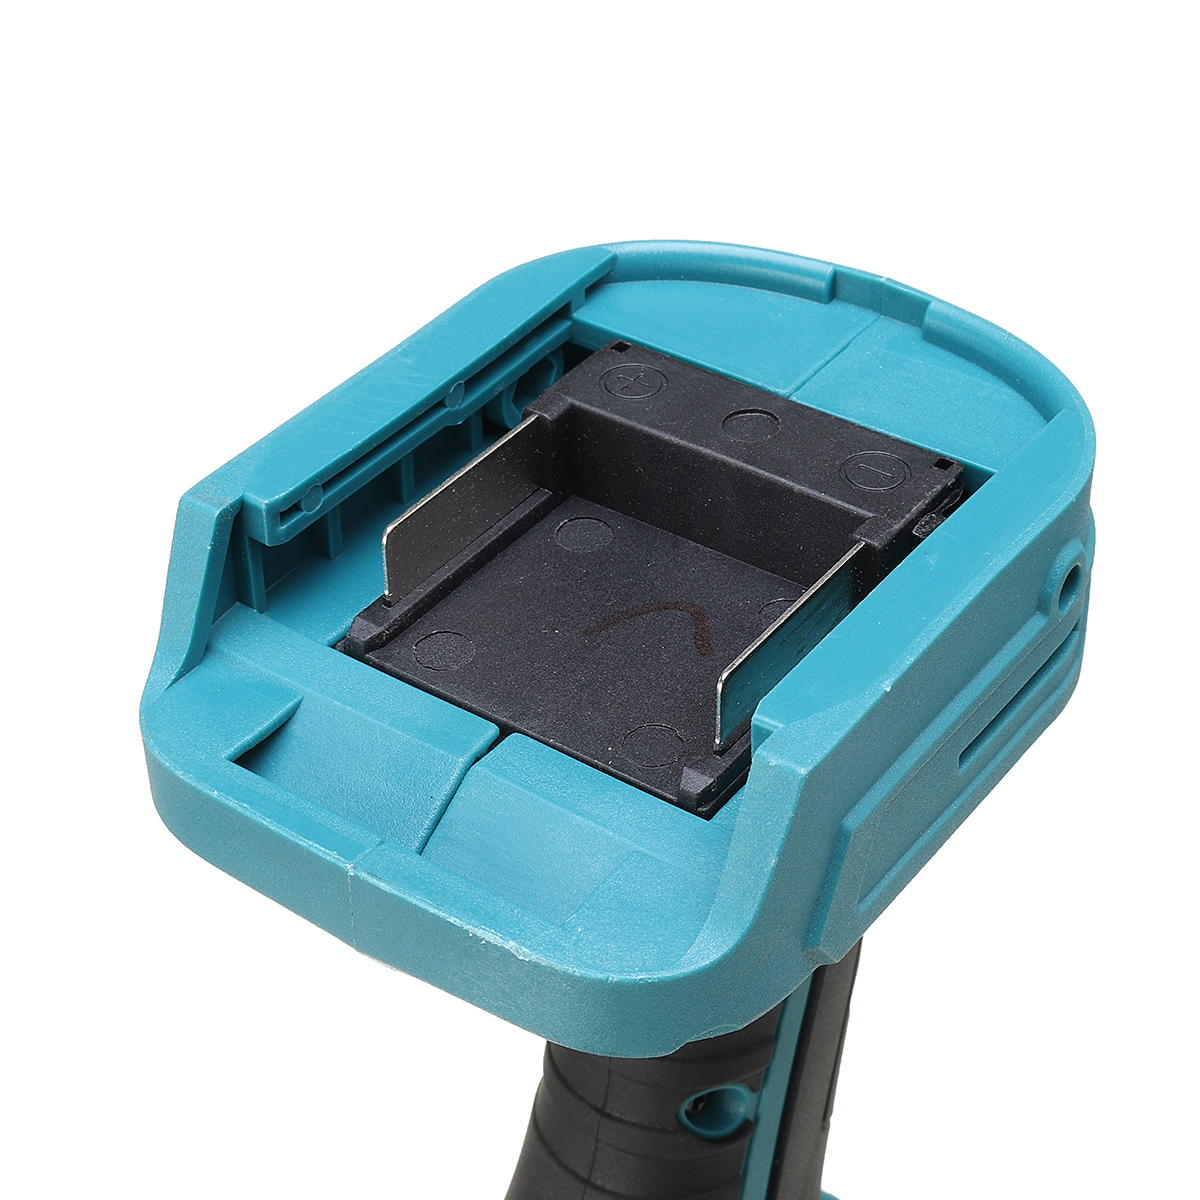 Rechargeable-Reciprocating-Saw-Brushless-Electric-Saw-For-Makita-Battery-Woodworking-Wood-Plastic-Ir-1886209-11